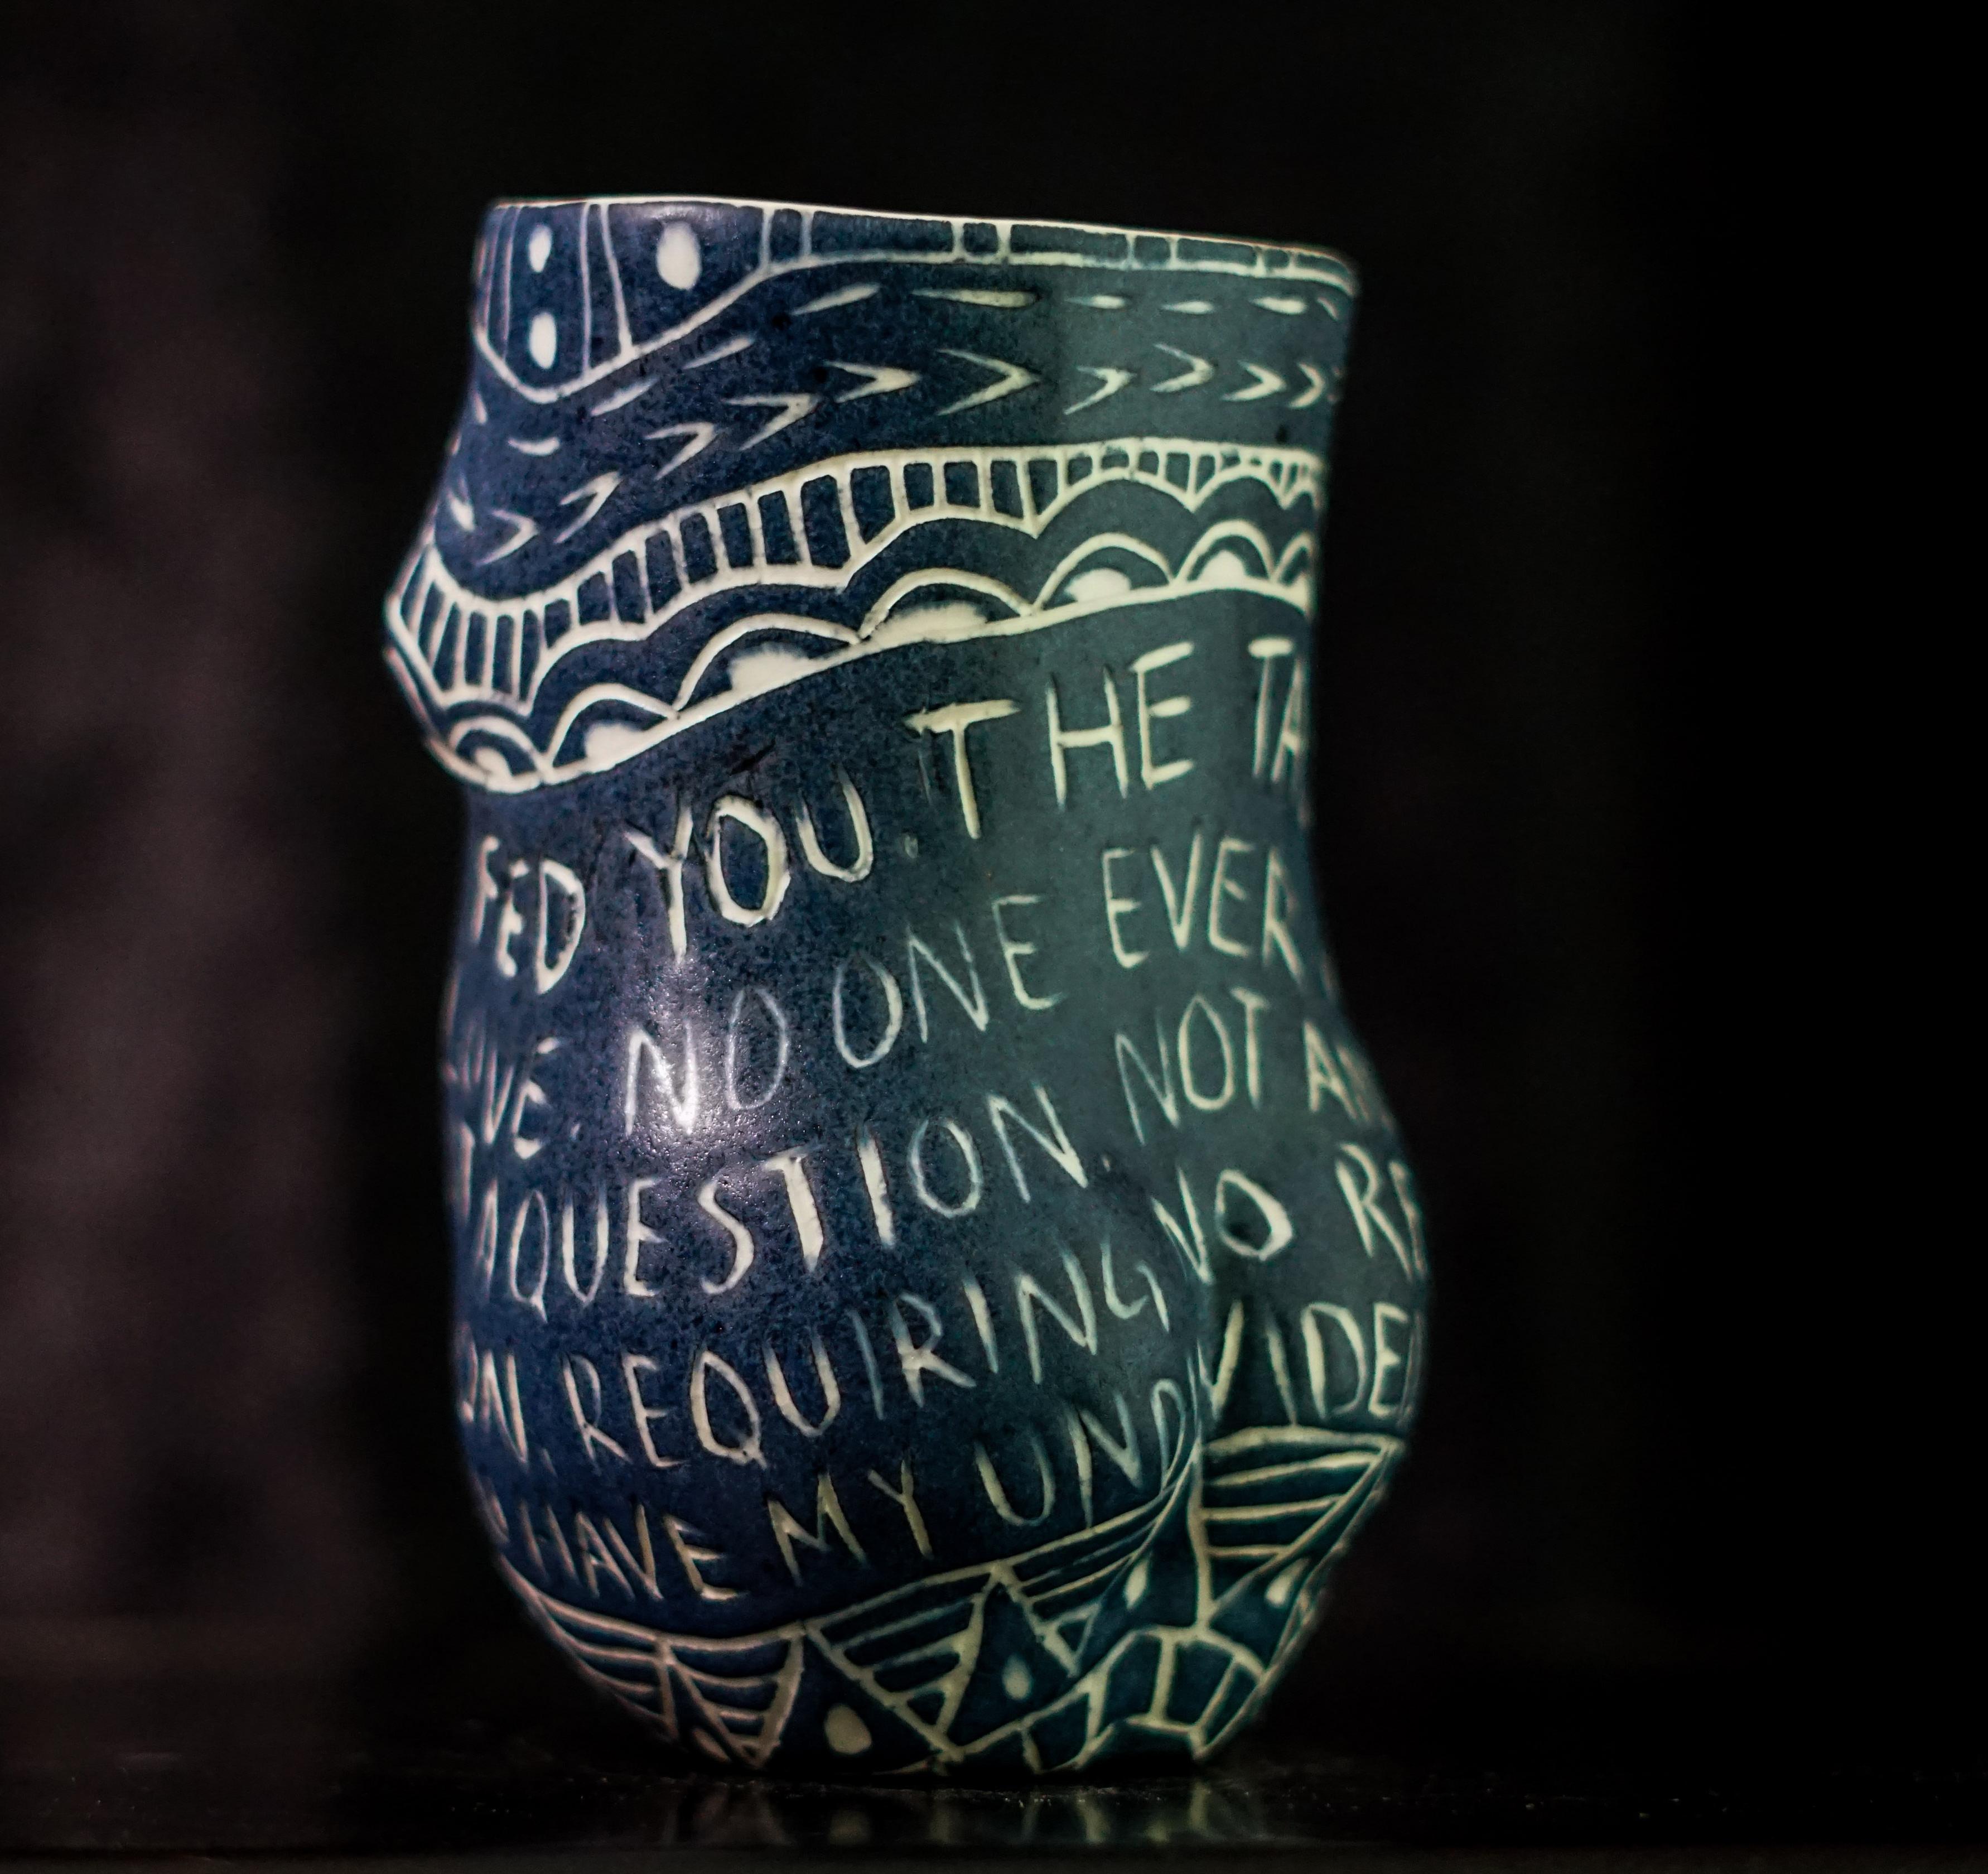 “No One Ever Fed You...” Porcelain cup with sgraffito detailing by the artist - Modern Sculpture by Alex Hodge